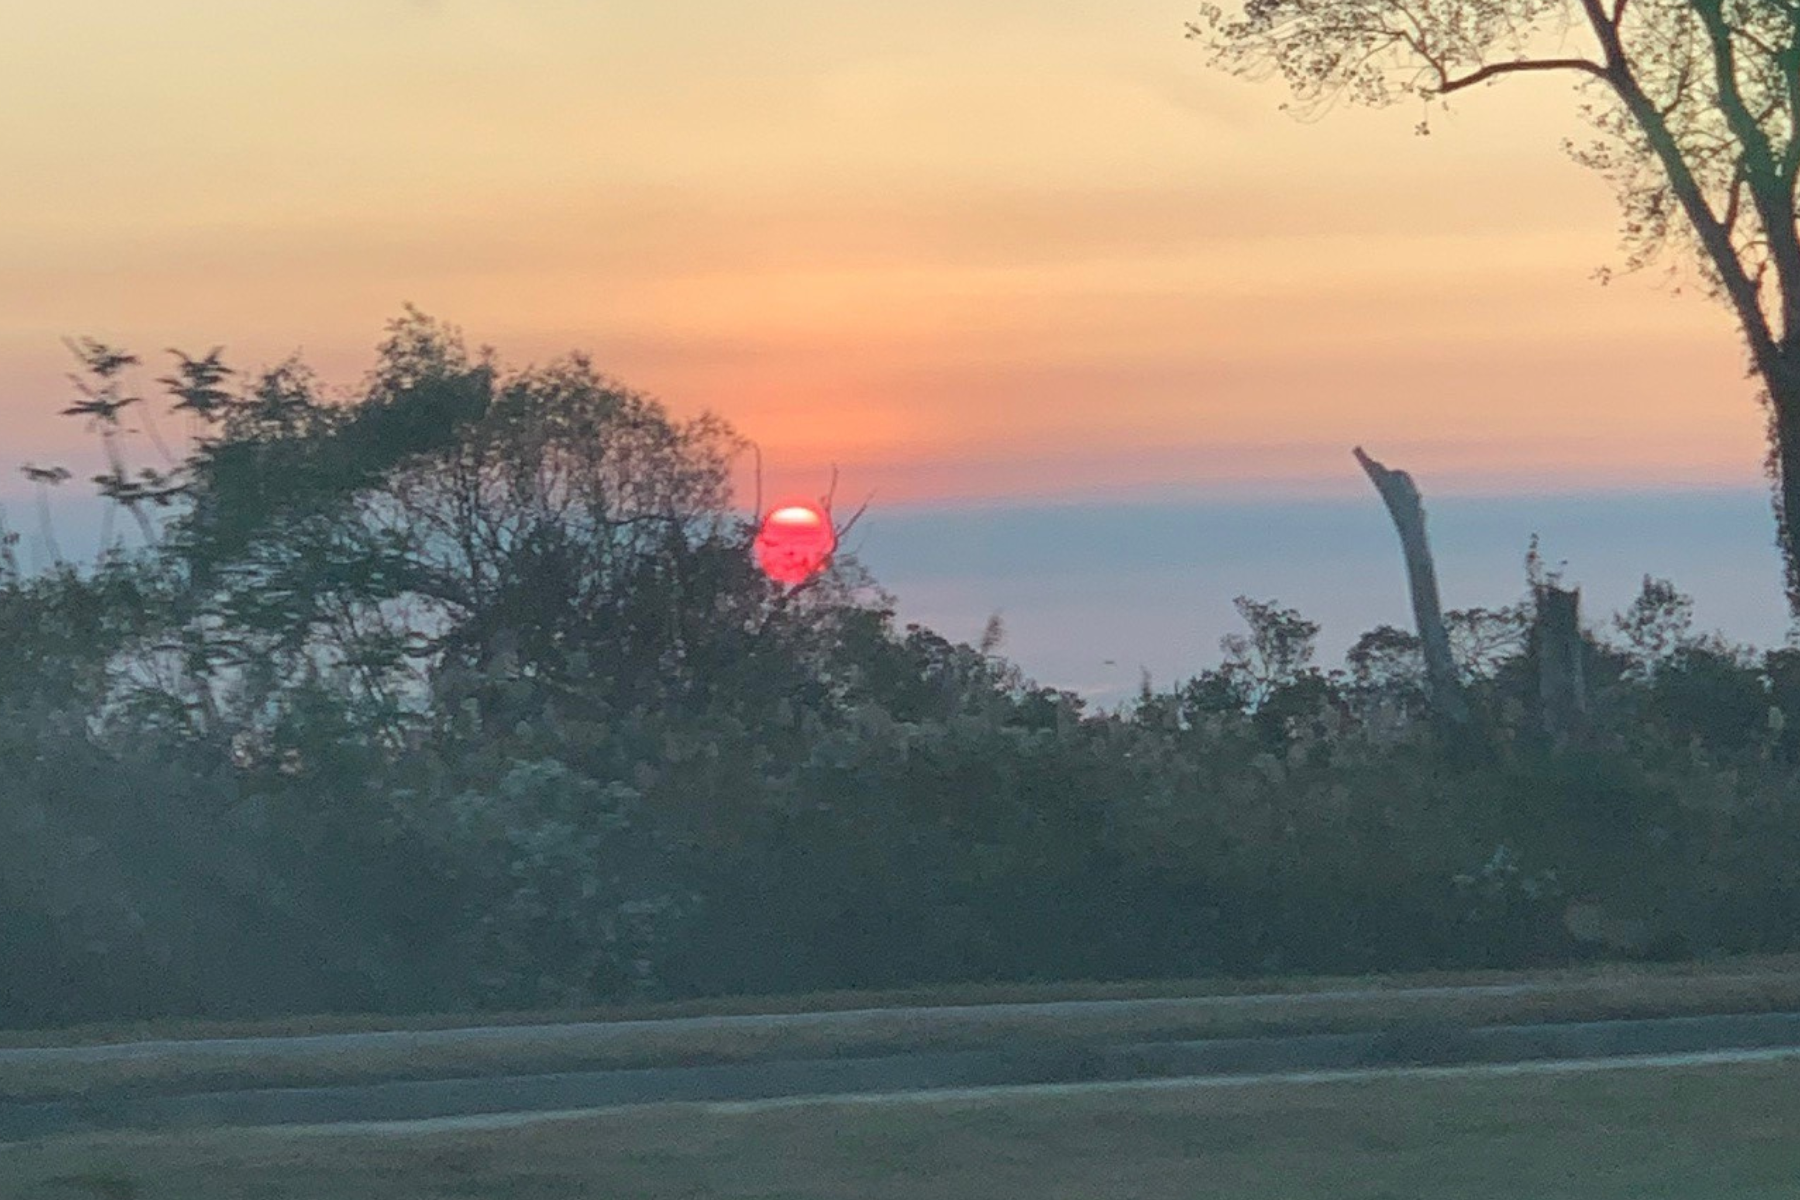 Sunrise view of the road at Making Strides 2020 Drive Through photo of orange sun rising behind trees.